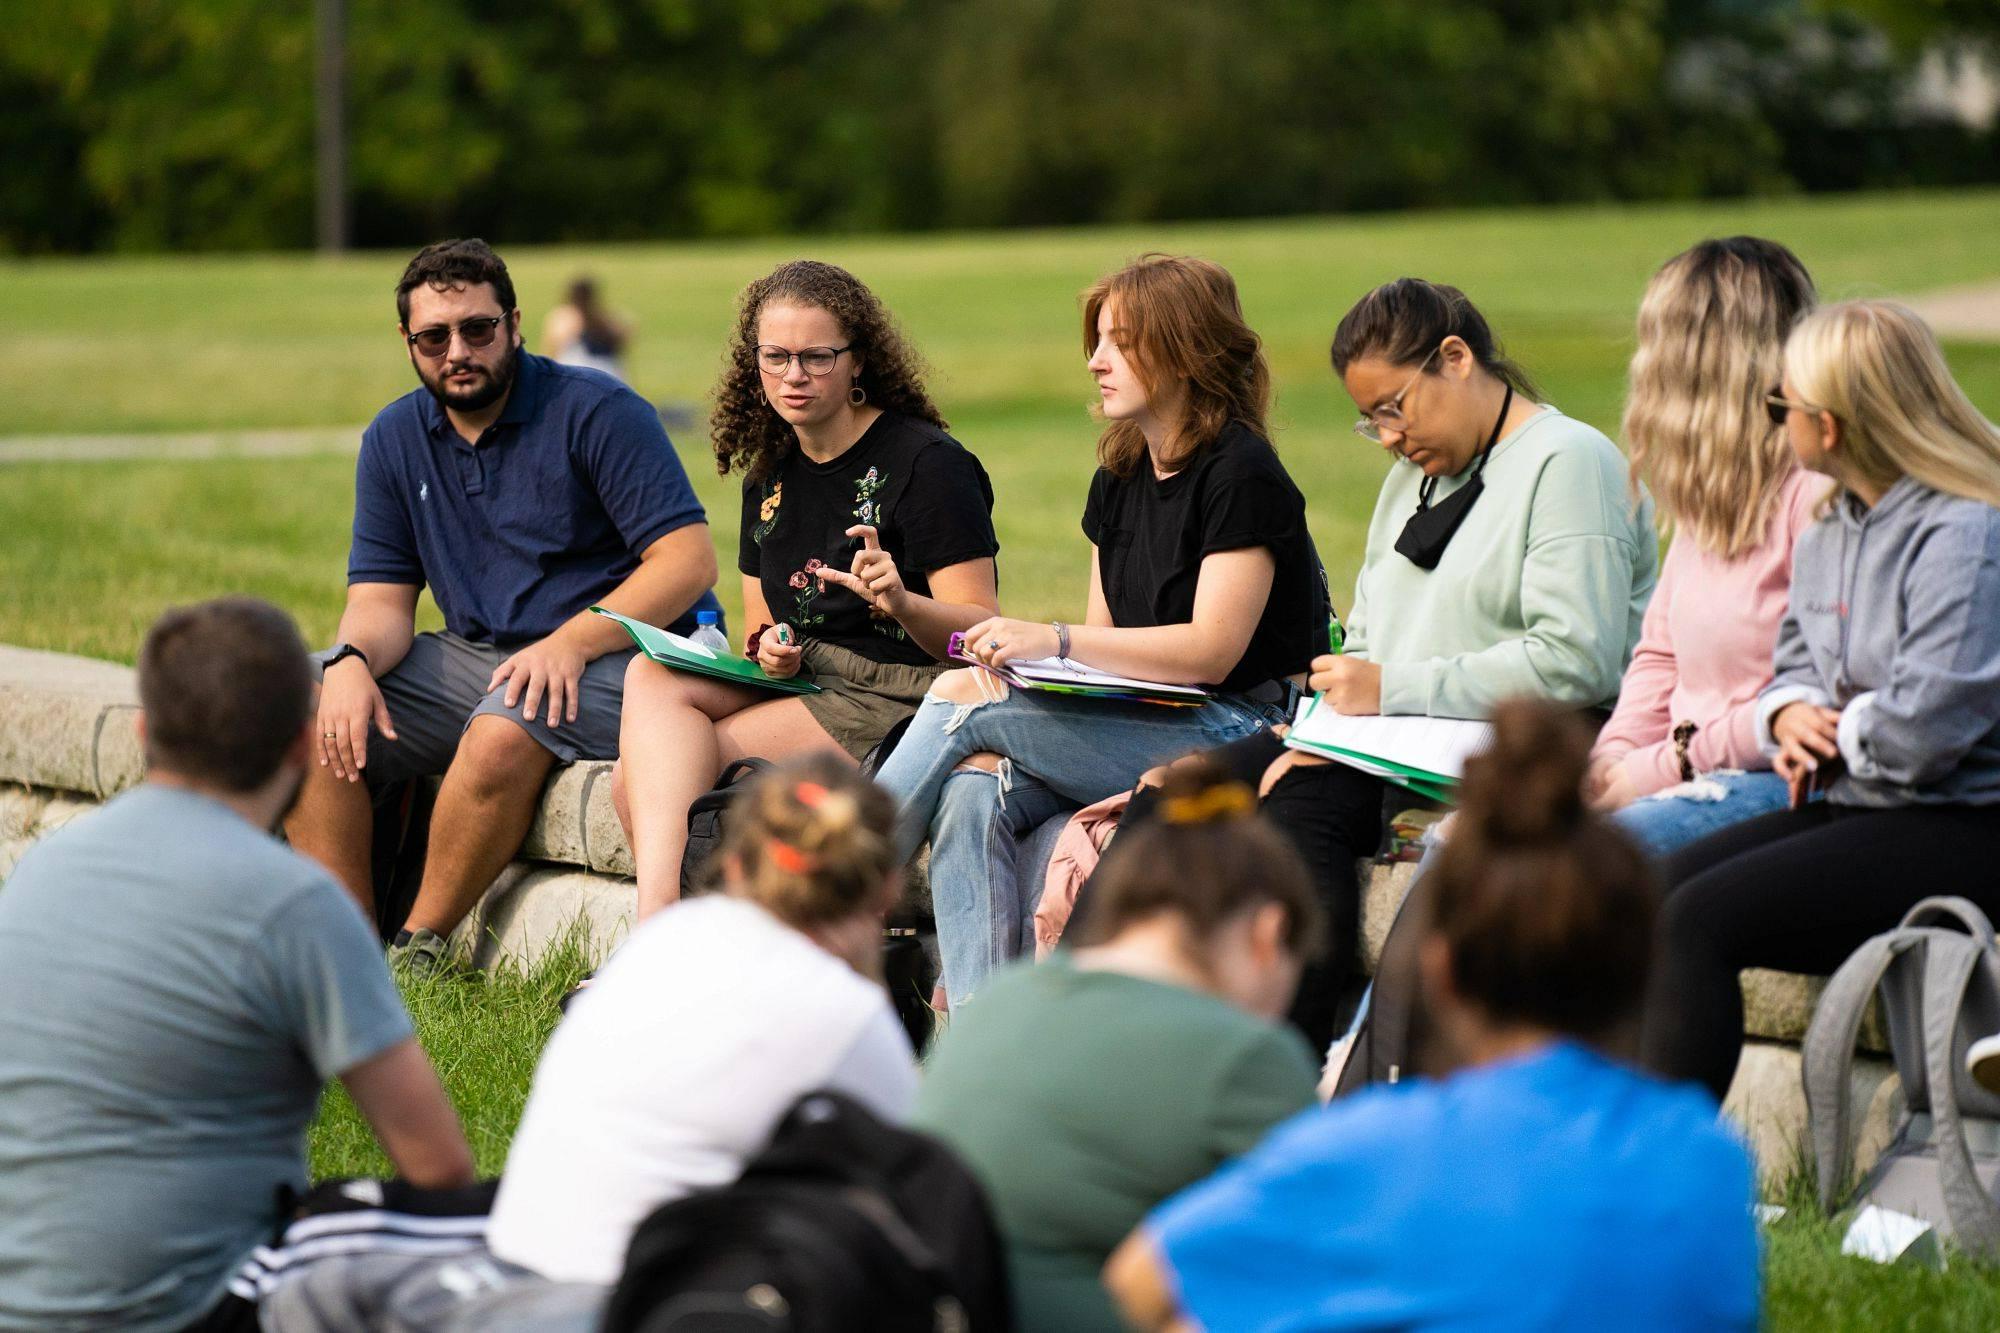 Students and a faculty member interact during an outdoor class session.